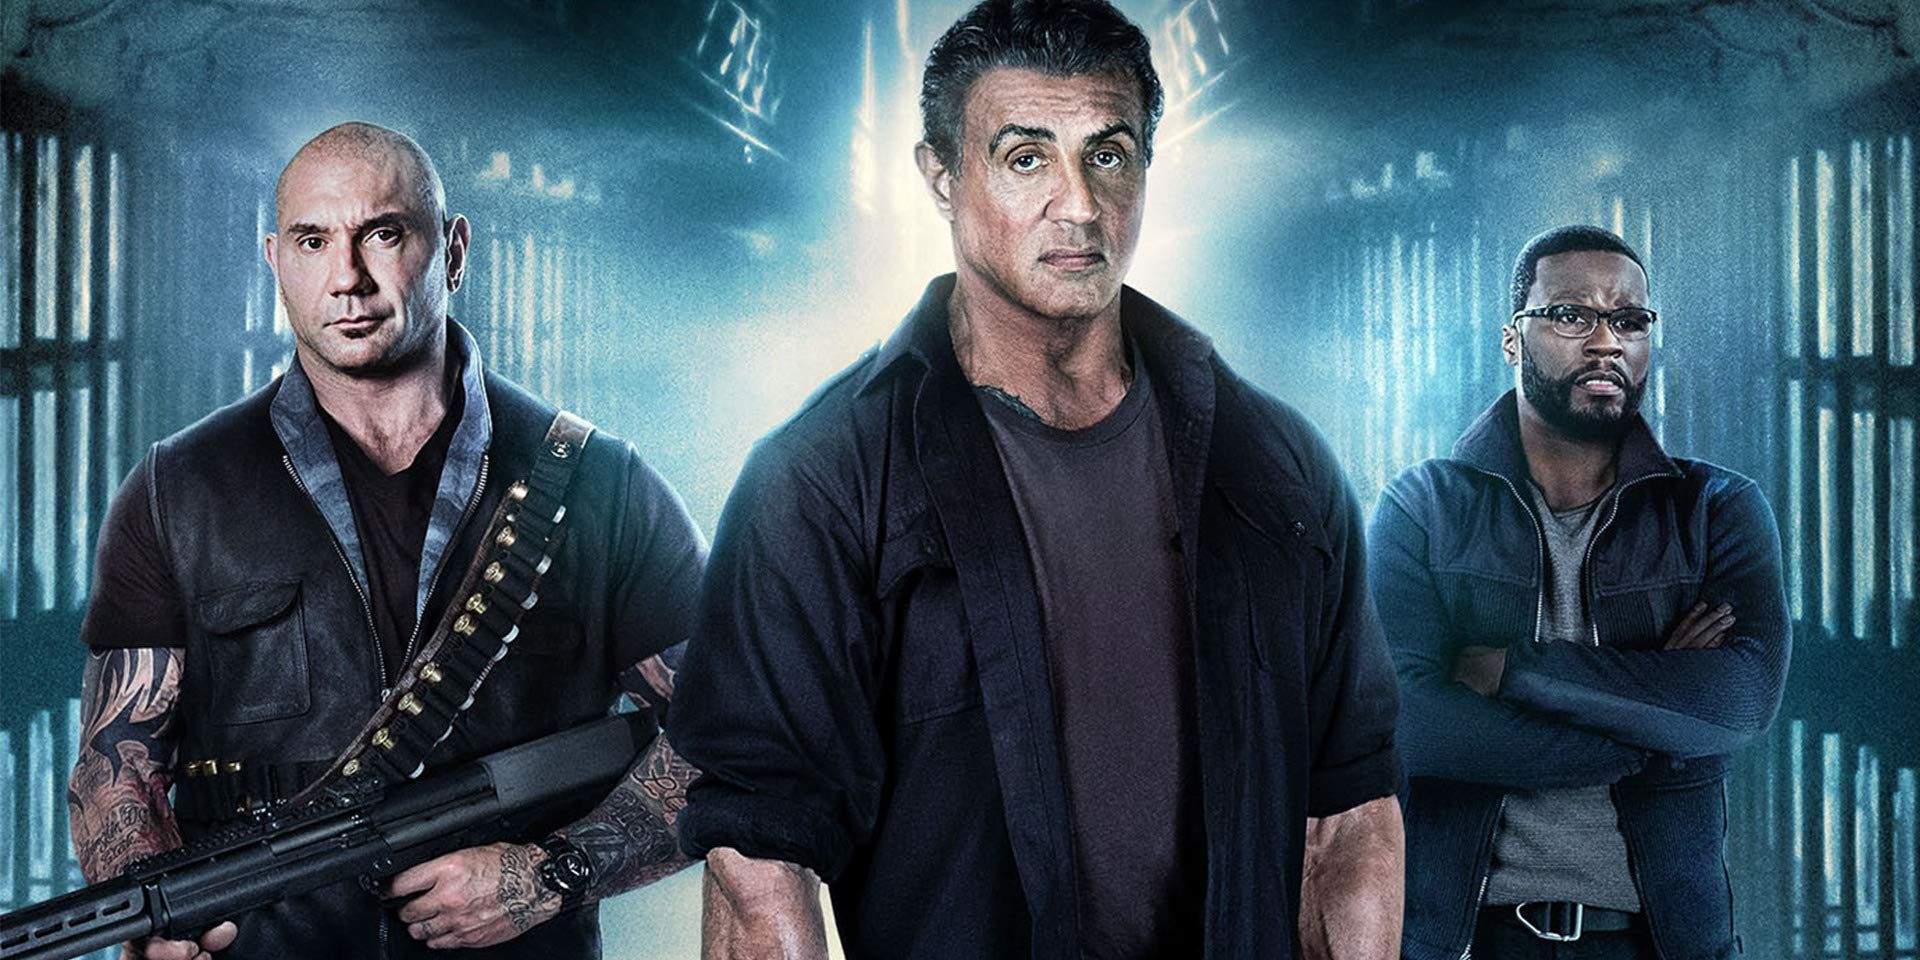 Every Sylvester Stallone Movie Franchise Ranked From Worst to Best